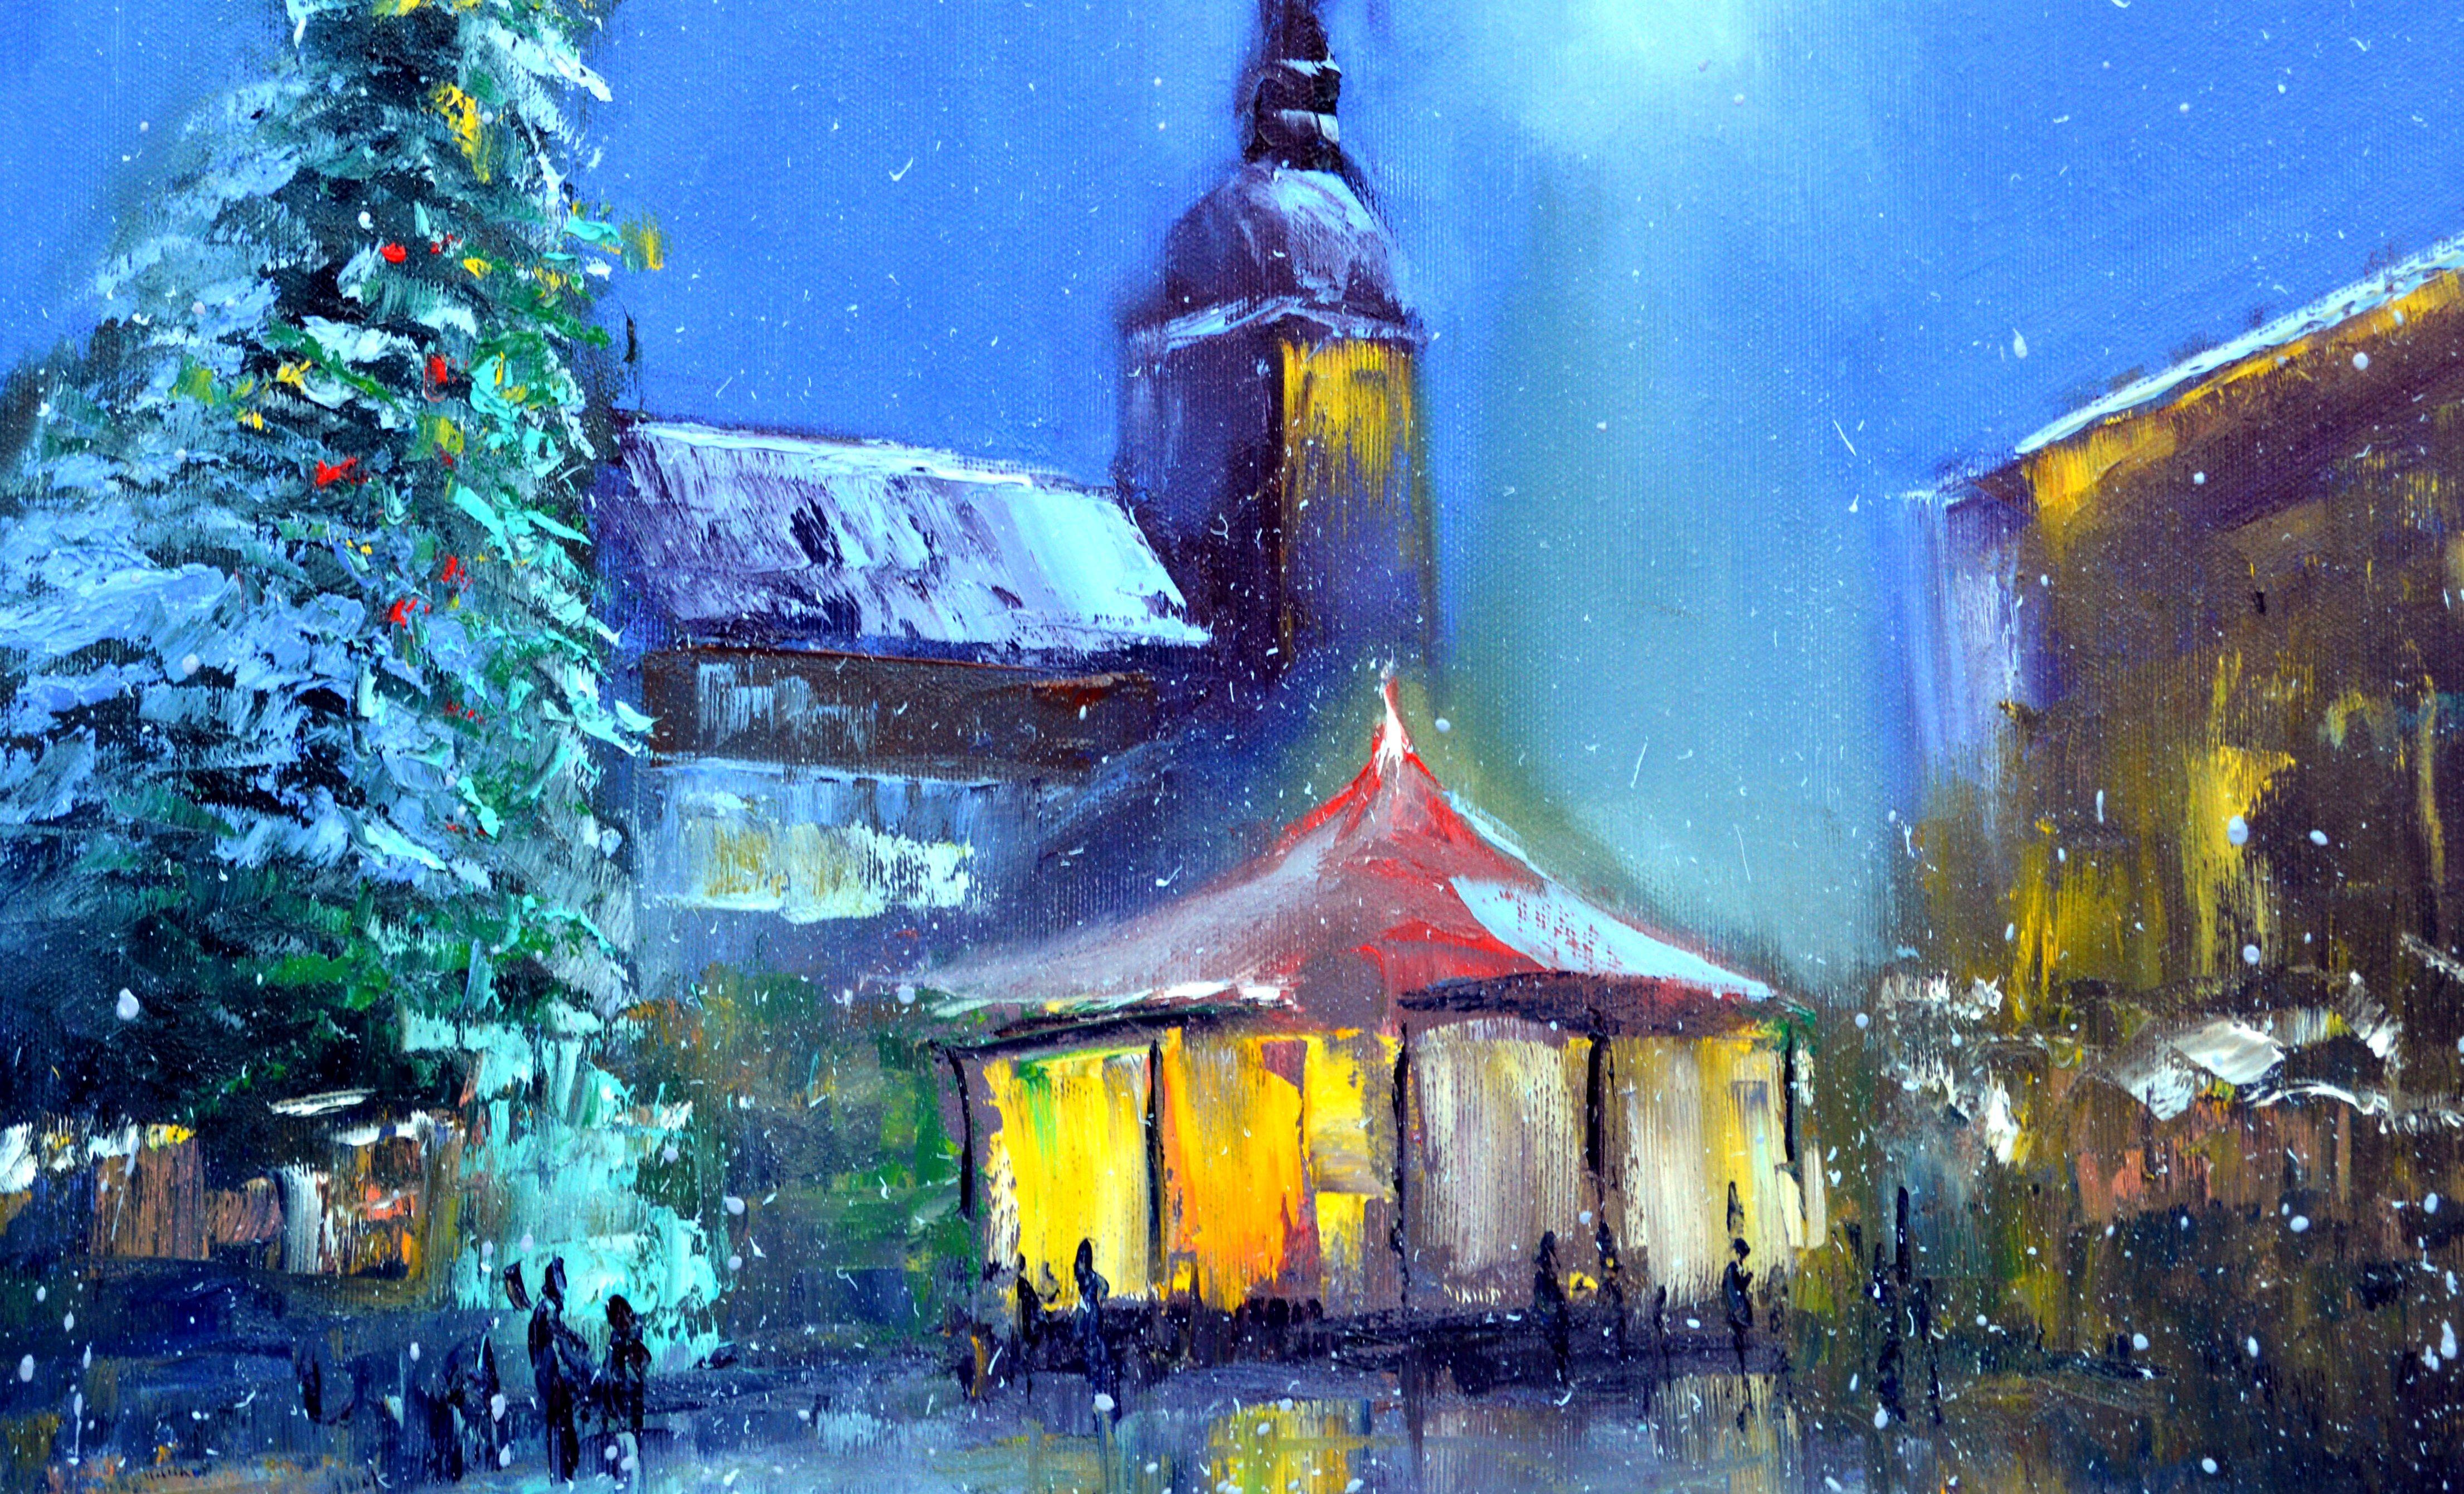 In this vibrant oil painting, I've captured the essence of wintertime festivity and warmth amidst the chill. The brushstrokes convey movement, reflecting the bustling energy of holiday goers intertwined with the tranquility of a snowy evening. The